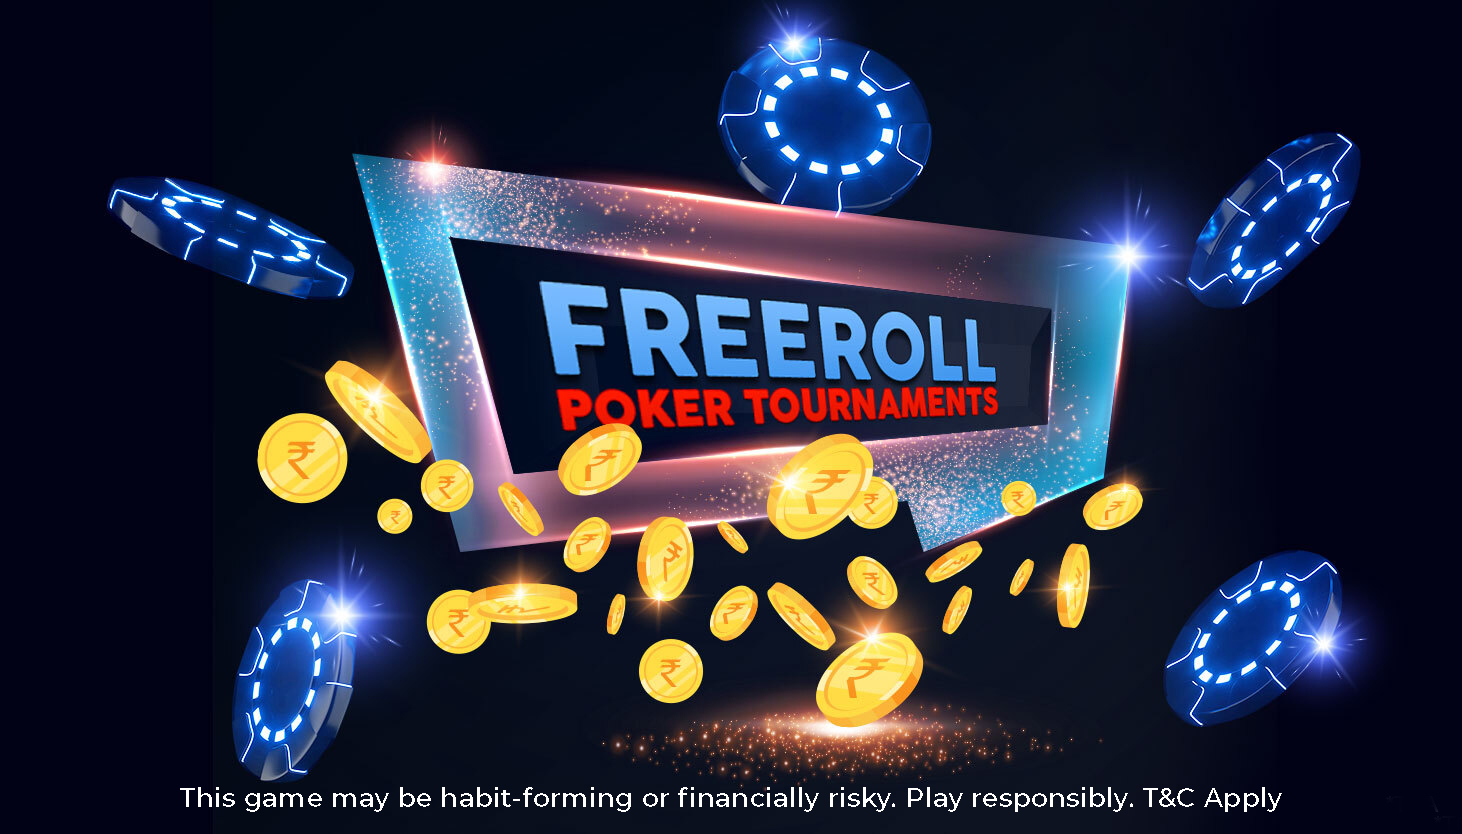 Freeroll Poker Tournaments india! Win 18 Lakhs every month